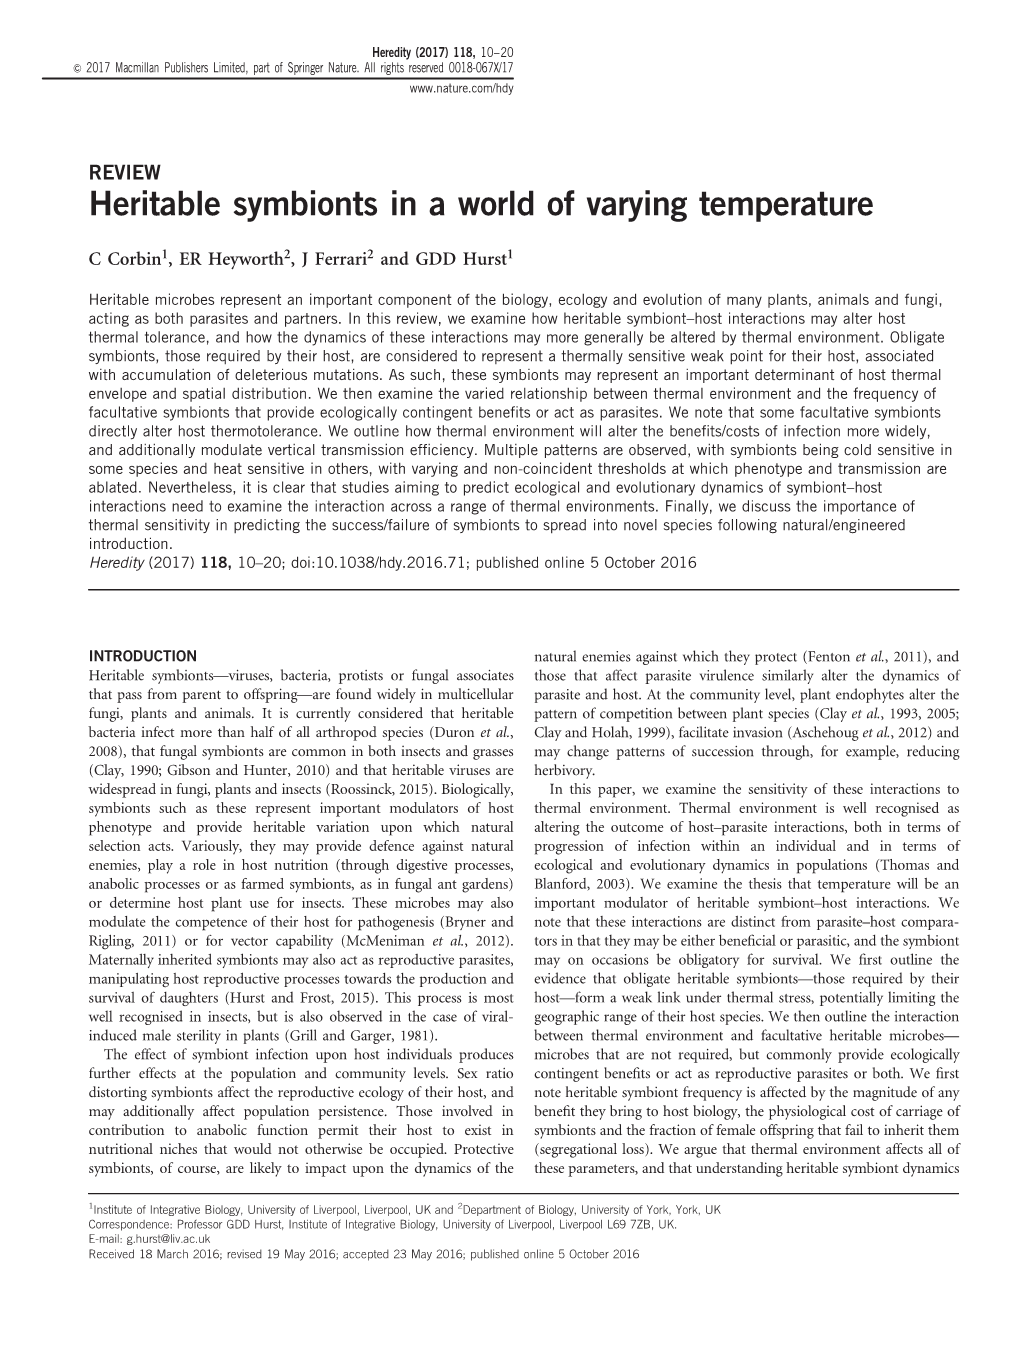 Heritable Symbionts in a World of Varying Temperature